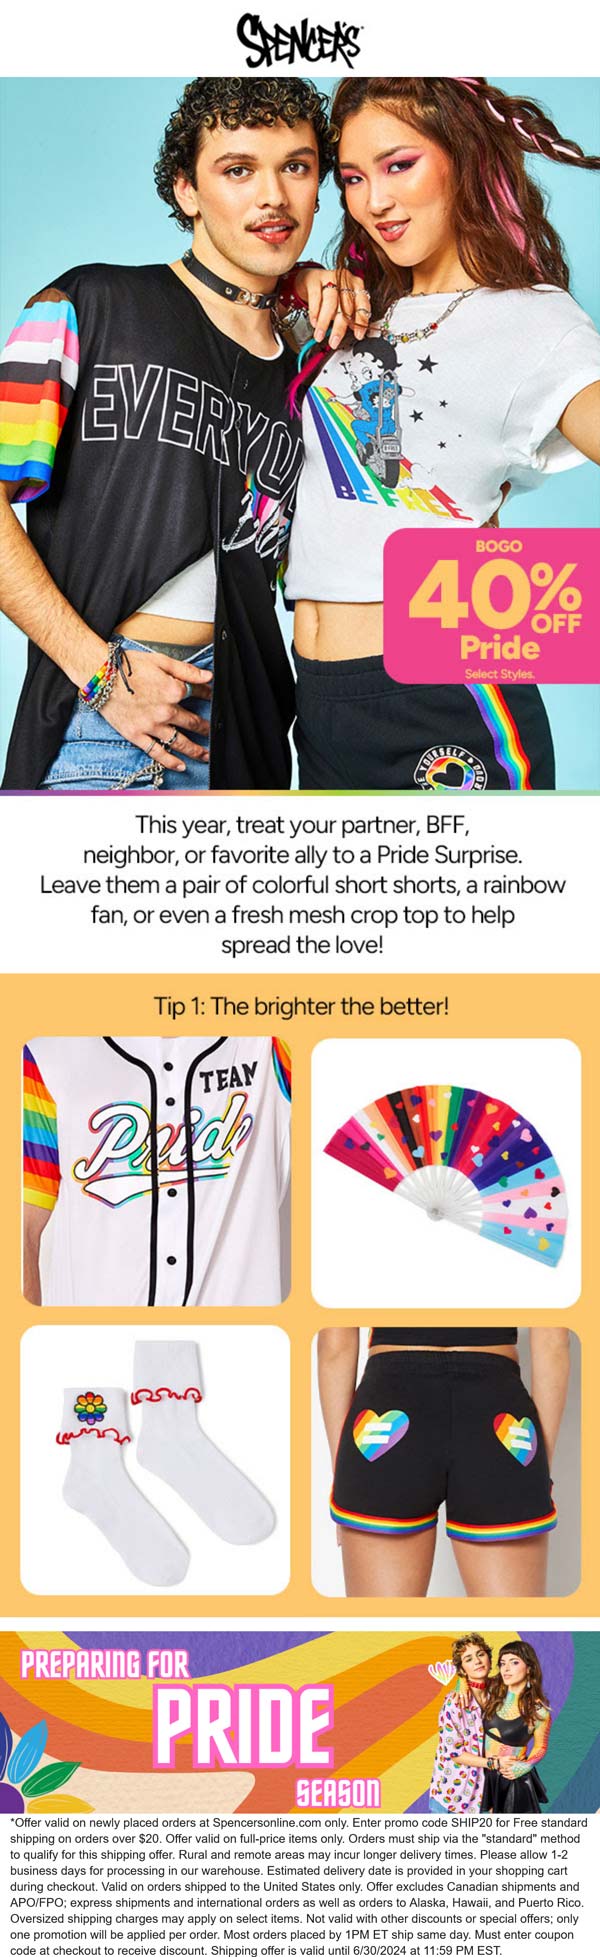 Spencers stores Coupon  Second pride item 40% off at Spencers with free shipping via promo SHIP20 #spencers 